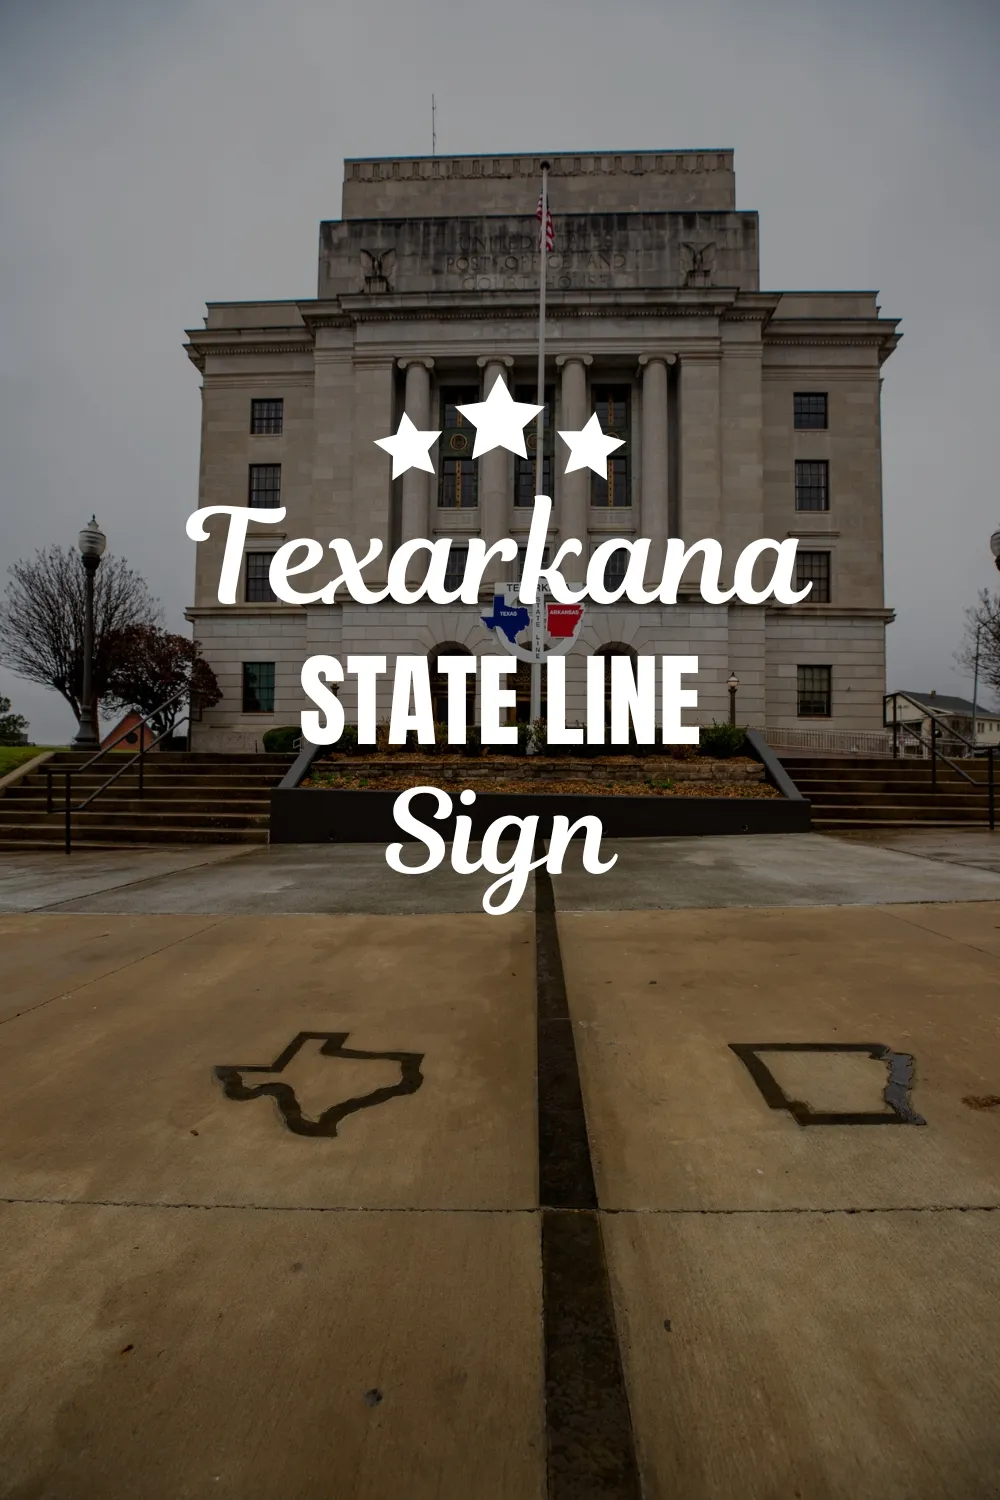 Have you ever wanted to be in two places at once? This unique attraction allows you to do just that. Straddle the line between Texas and Arkansas at the Texarkana State Line Sign! This unique roadside attraction has a fun road trip photo op and the only government building to straddle two states! #Texas #Arkansas #TexasRoadsideAttractions #ArkansasRoadsideAttractions #TexasRoadTrip #ArkansasRoadTrip #RoadTrip #RoadsideAttraction